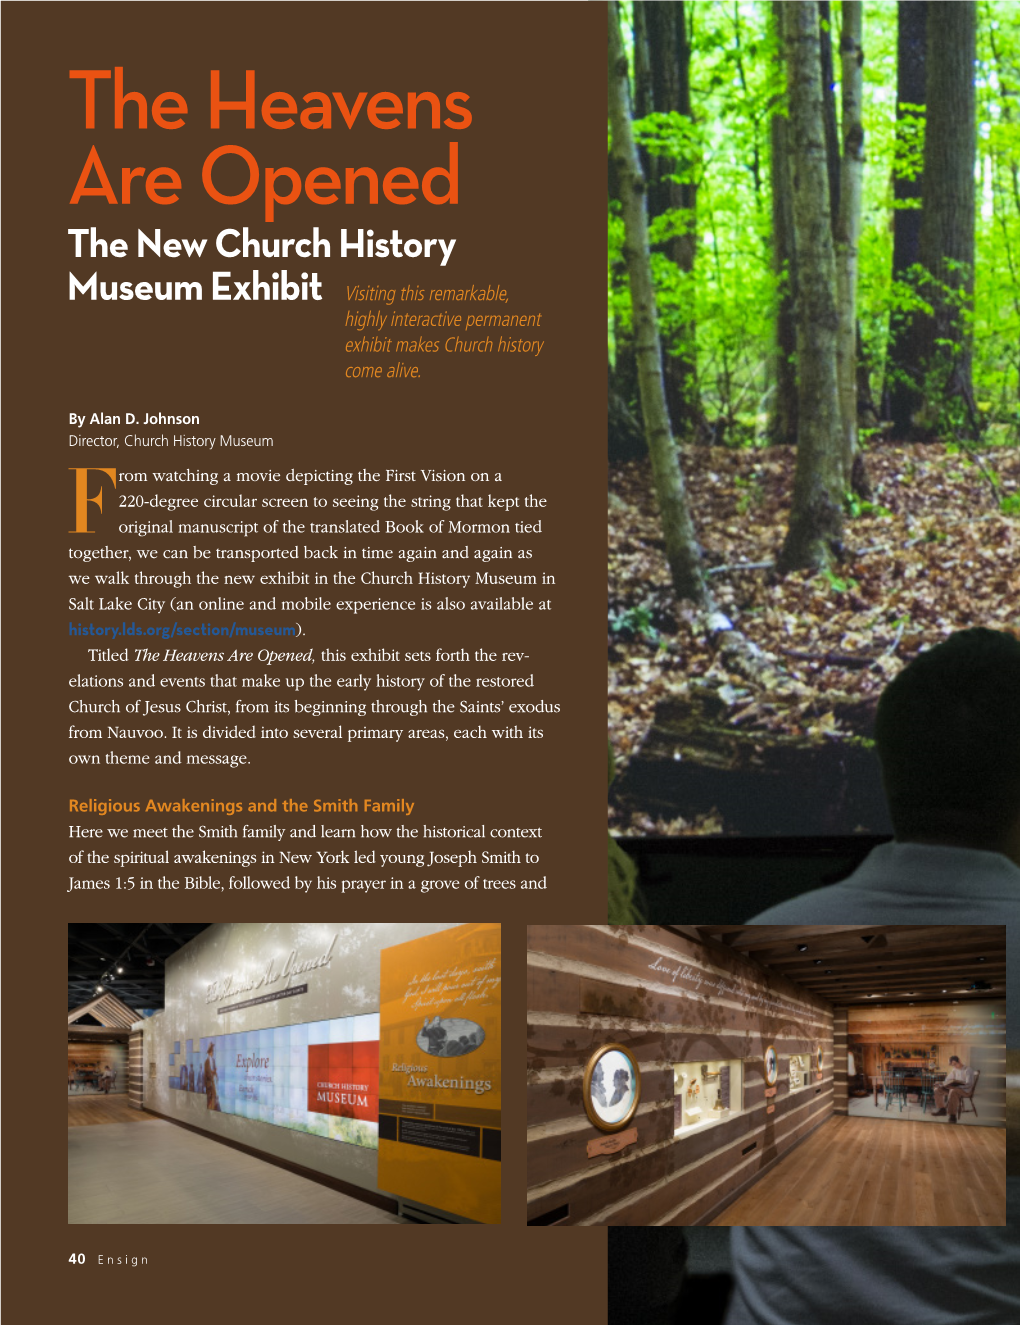 The Heavens Are Opened the New Church History Museum Exhibit Visiting This Remarkable, Highly Interactive Permanent Exhibit Makes Church History Come Alive